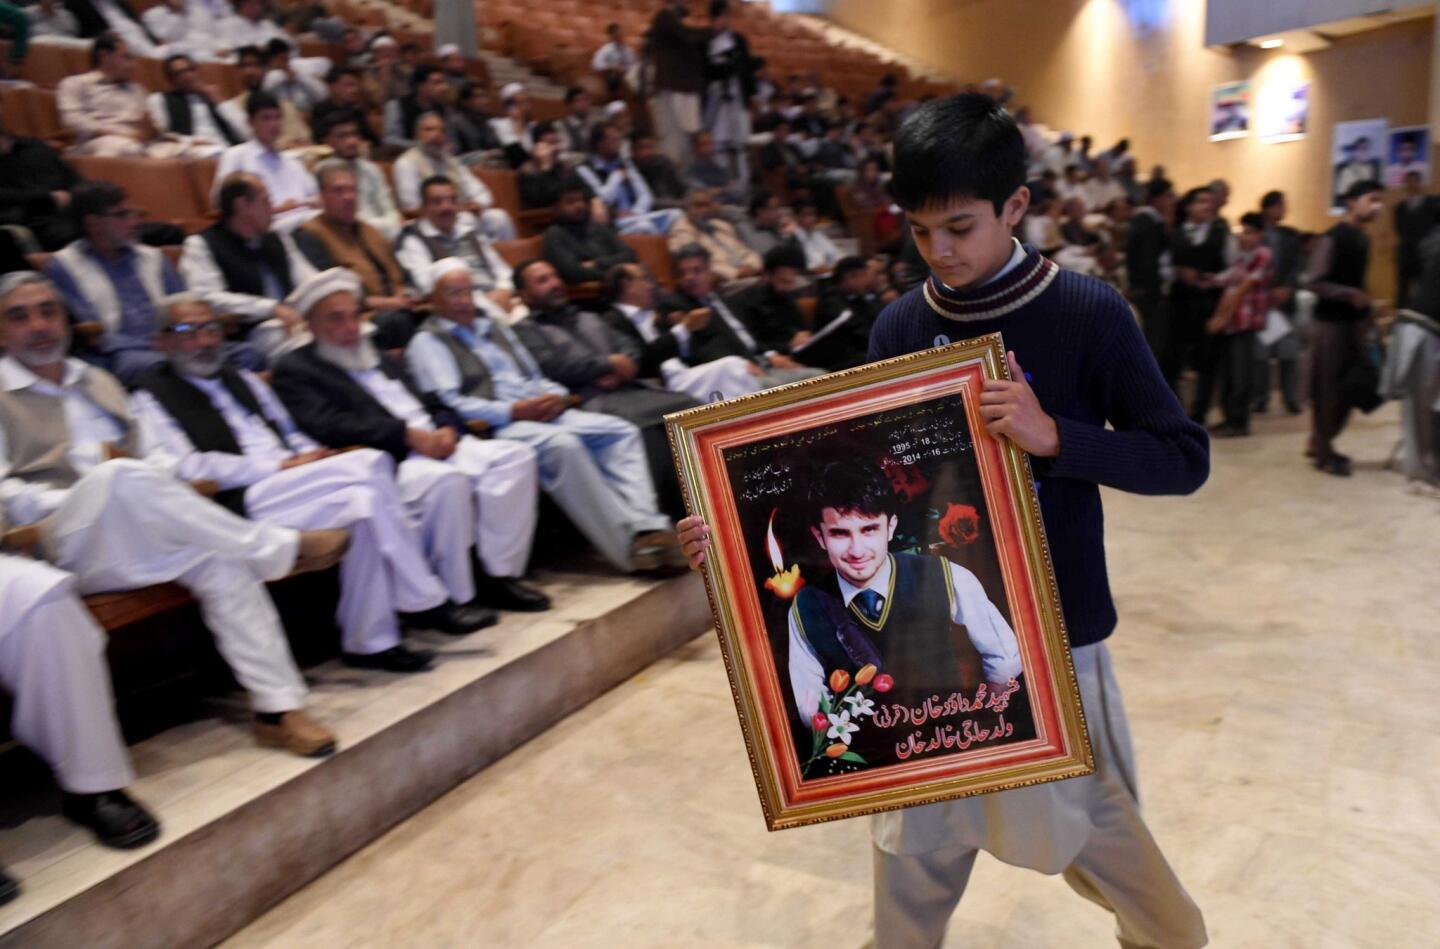 Pictures in the News | Peshawar, Pakistan